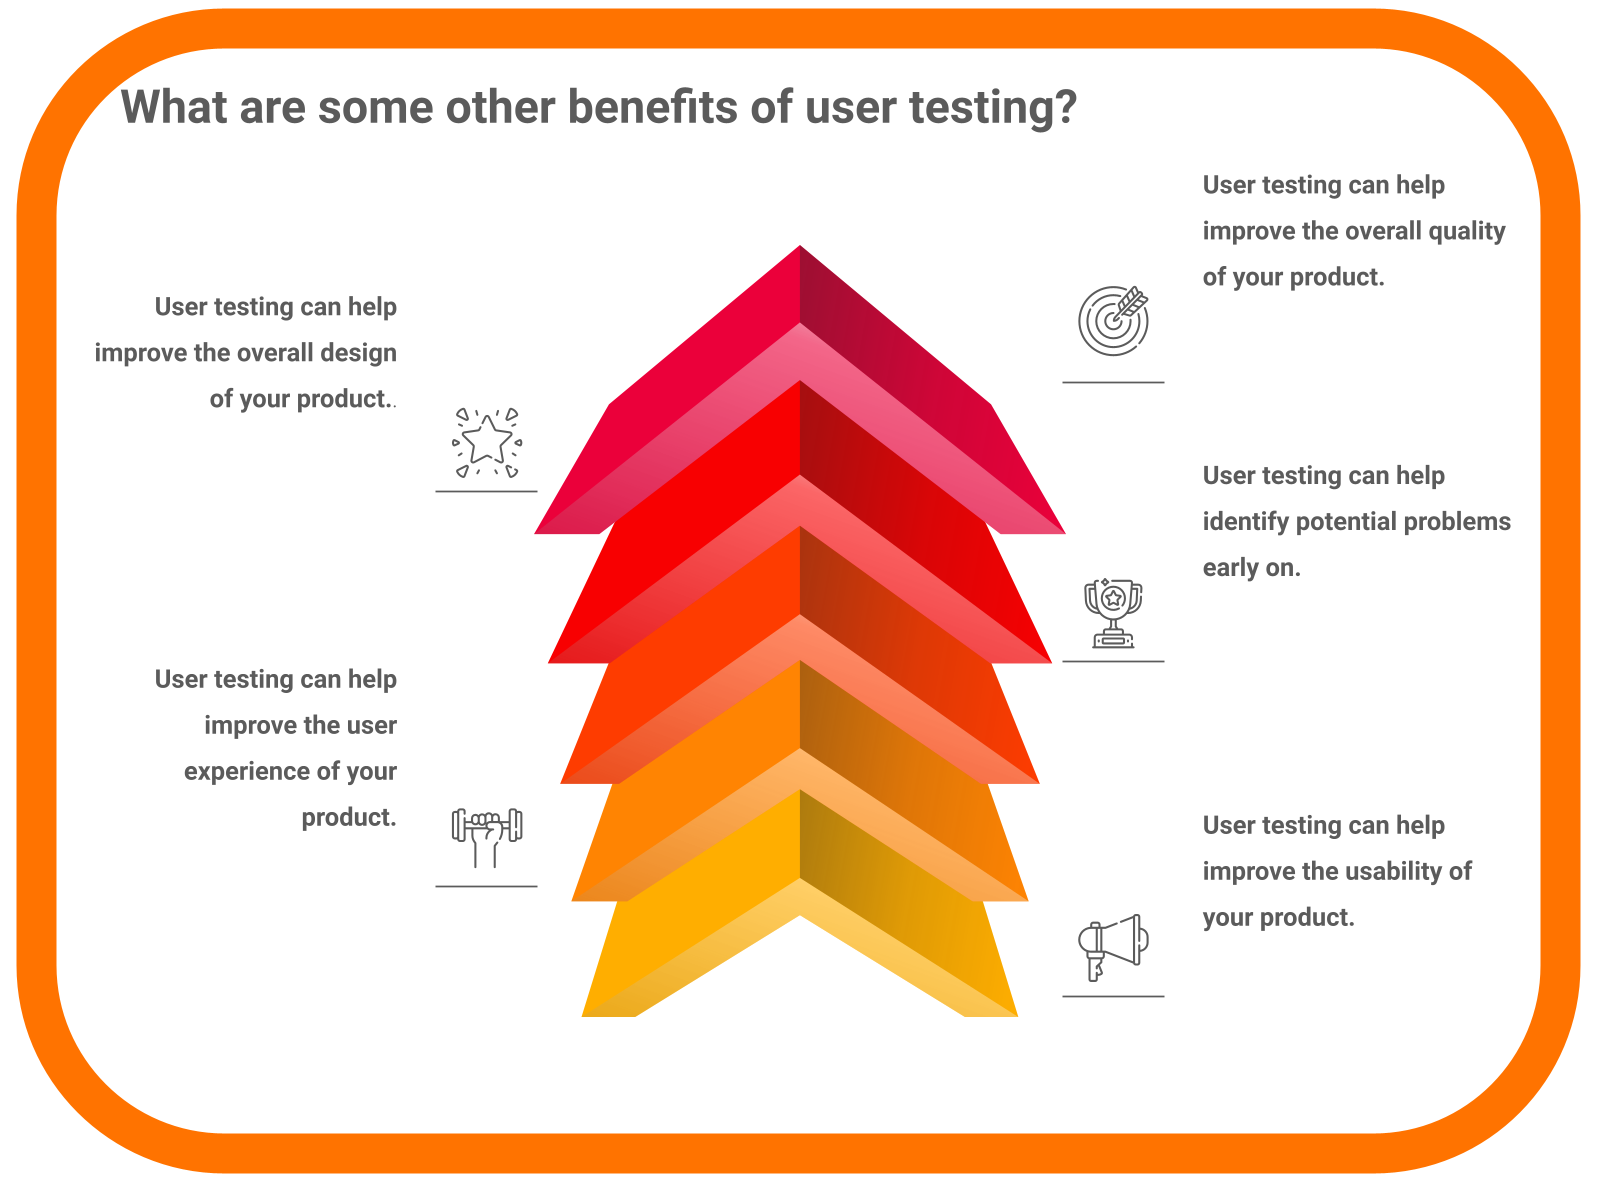 What are some other benefits of user testing?